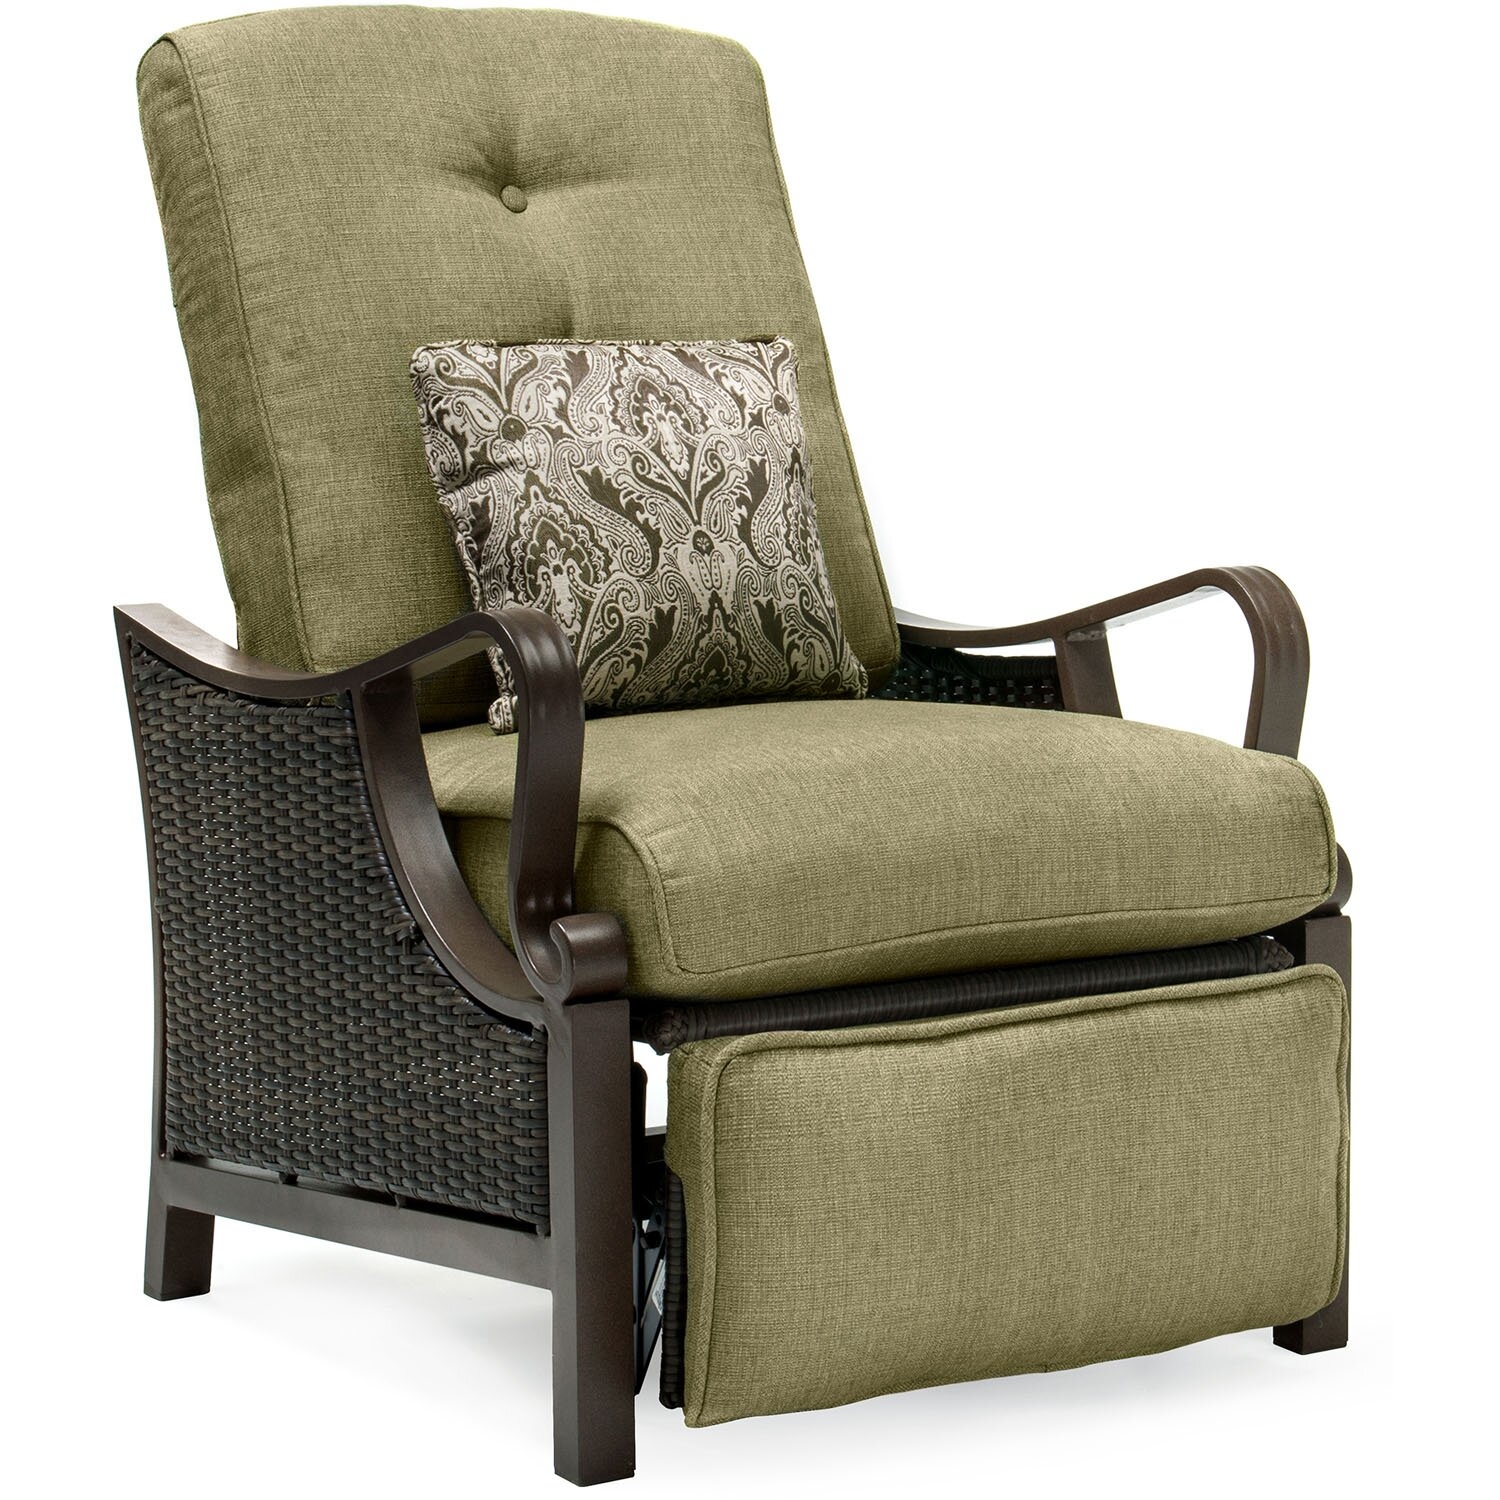 Lazy boy outdoor recliner chair